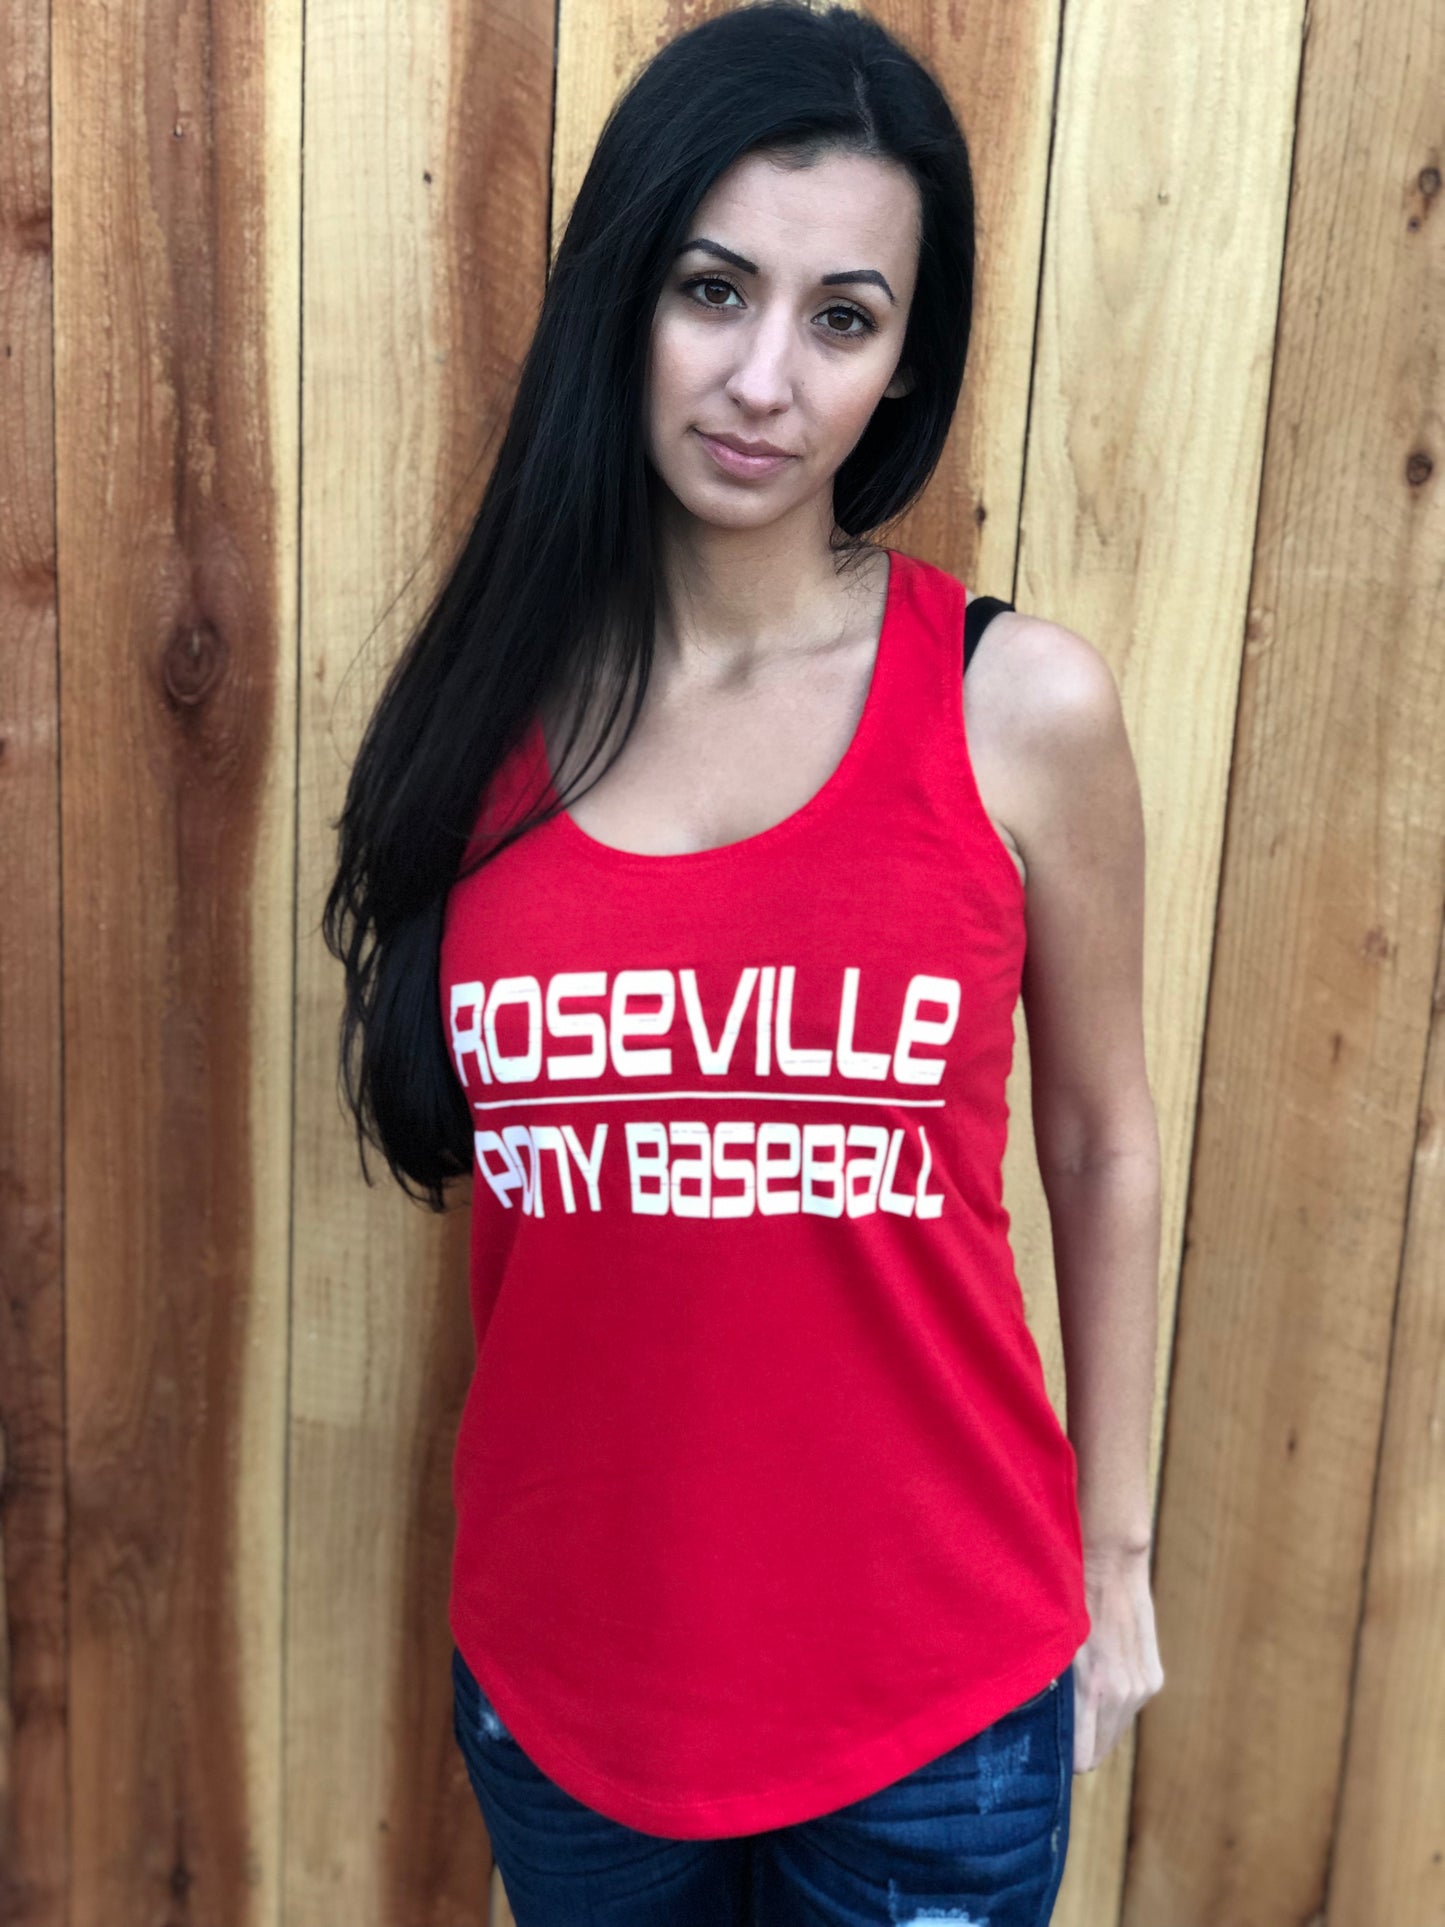 Ladies Roseville Pony French Terry Tank